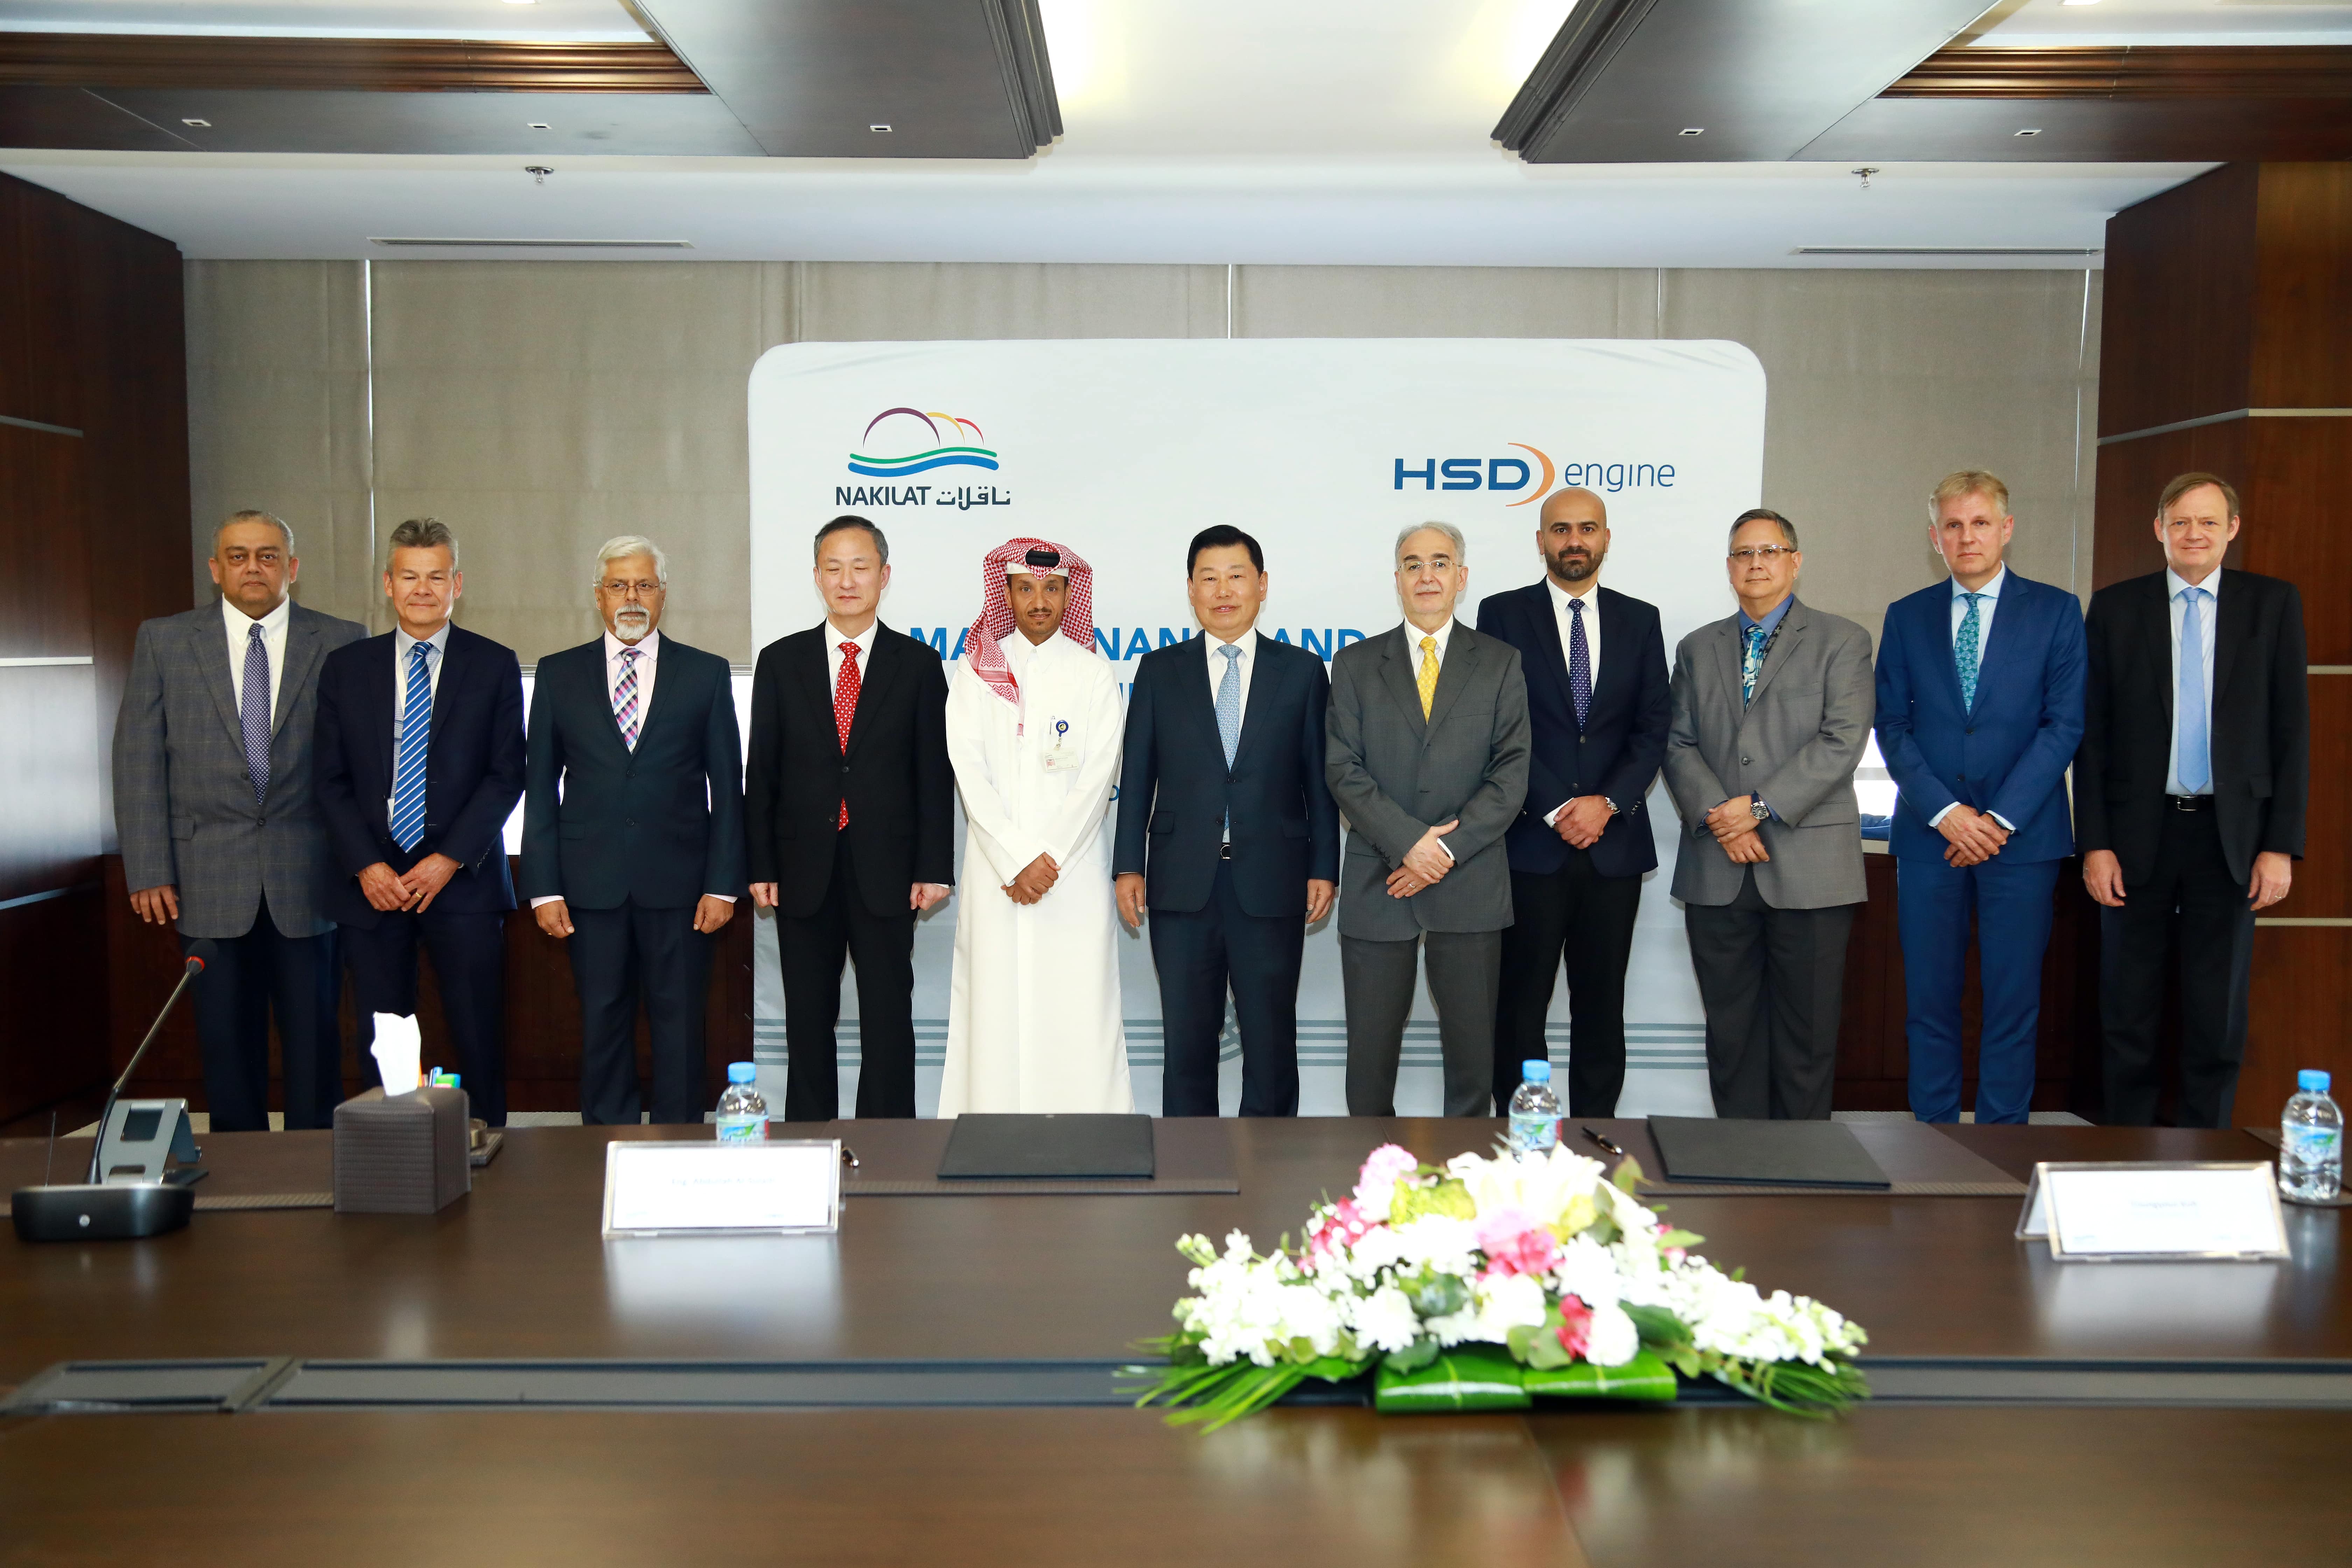 Nakilat and HSD Engine sign long-term engine maintenance and services contract